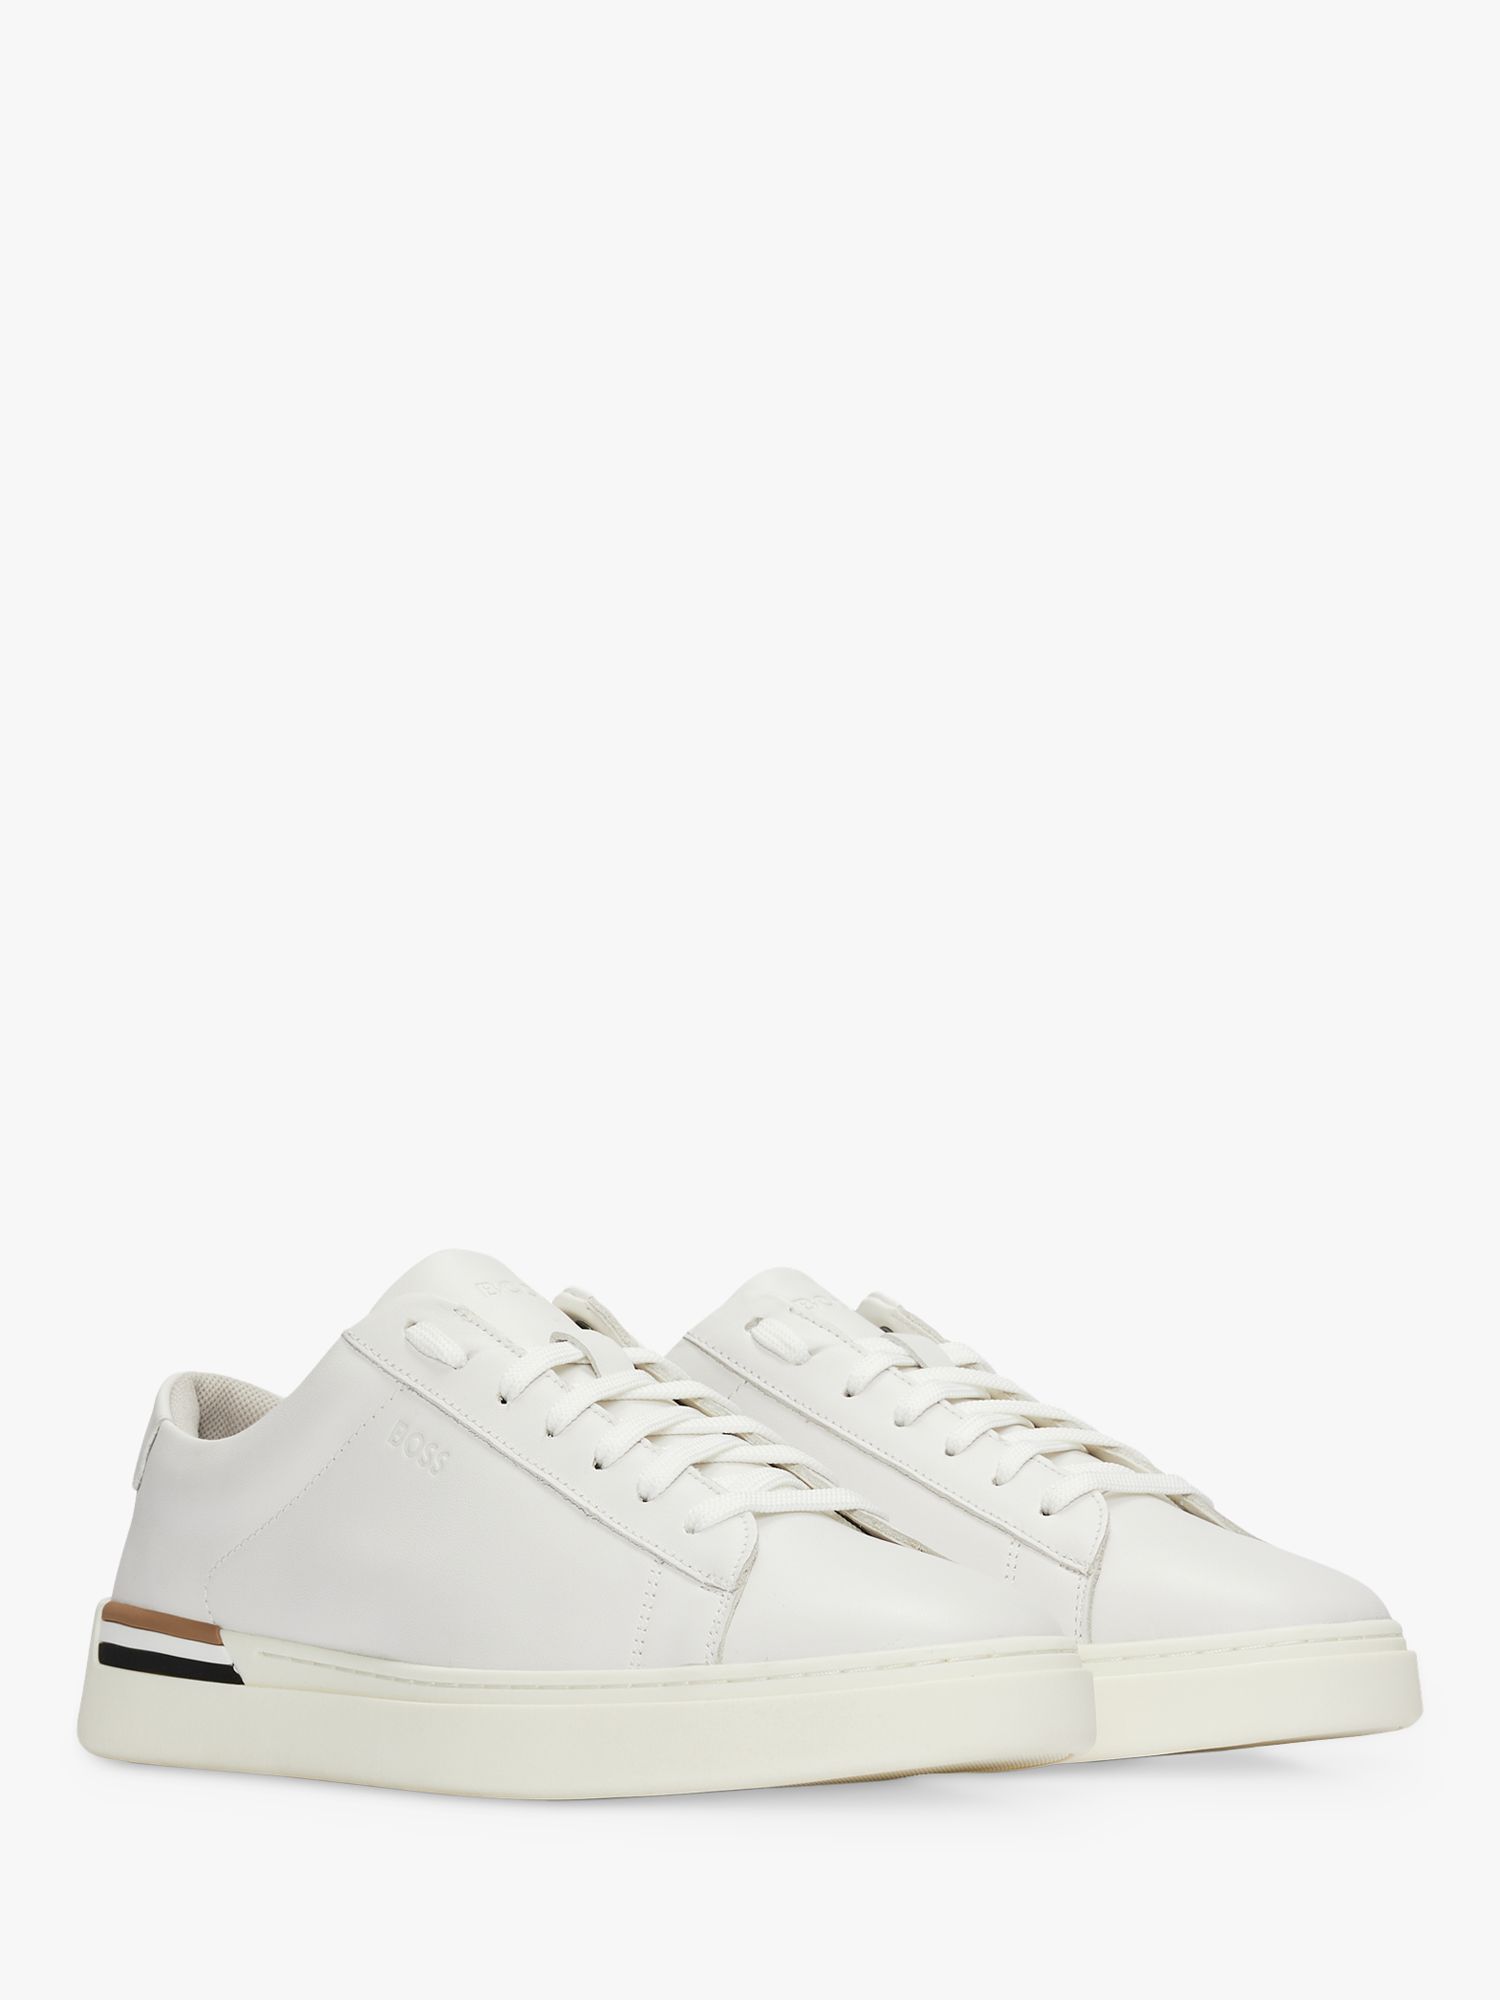 BOSS Clint Lace Up Trainers, White, 12